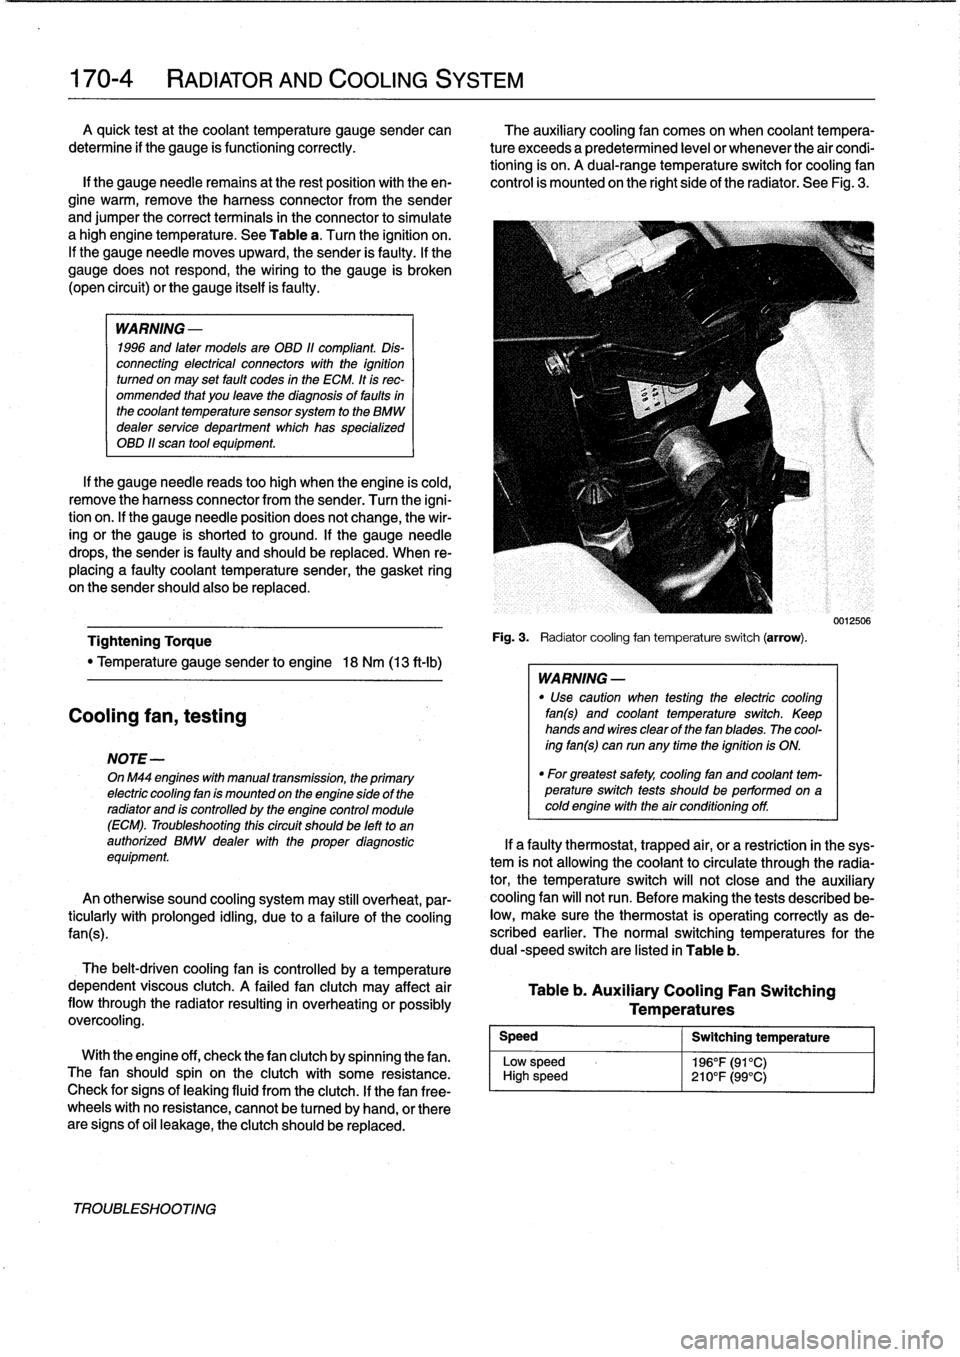 BMW 328i 1995 E36 Workshop Manual 
170-
4

	

RADIATOR
AND
COOLING
SYSTEM
A
quick
testat
the
coolant
temperature
gauge
sender
can

	

The
auxiliary
cooling
fan
comes
on
when
coolant
tempera

determine
if
the
gauge
is
functioning
corre